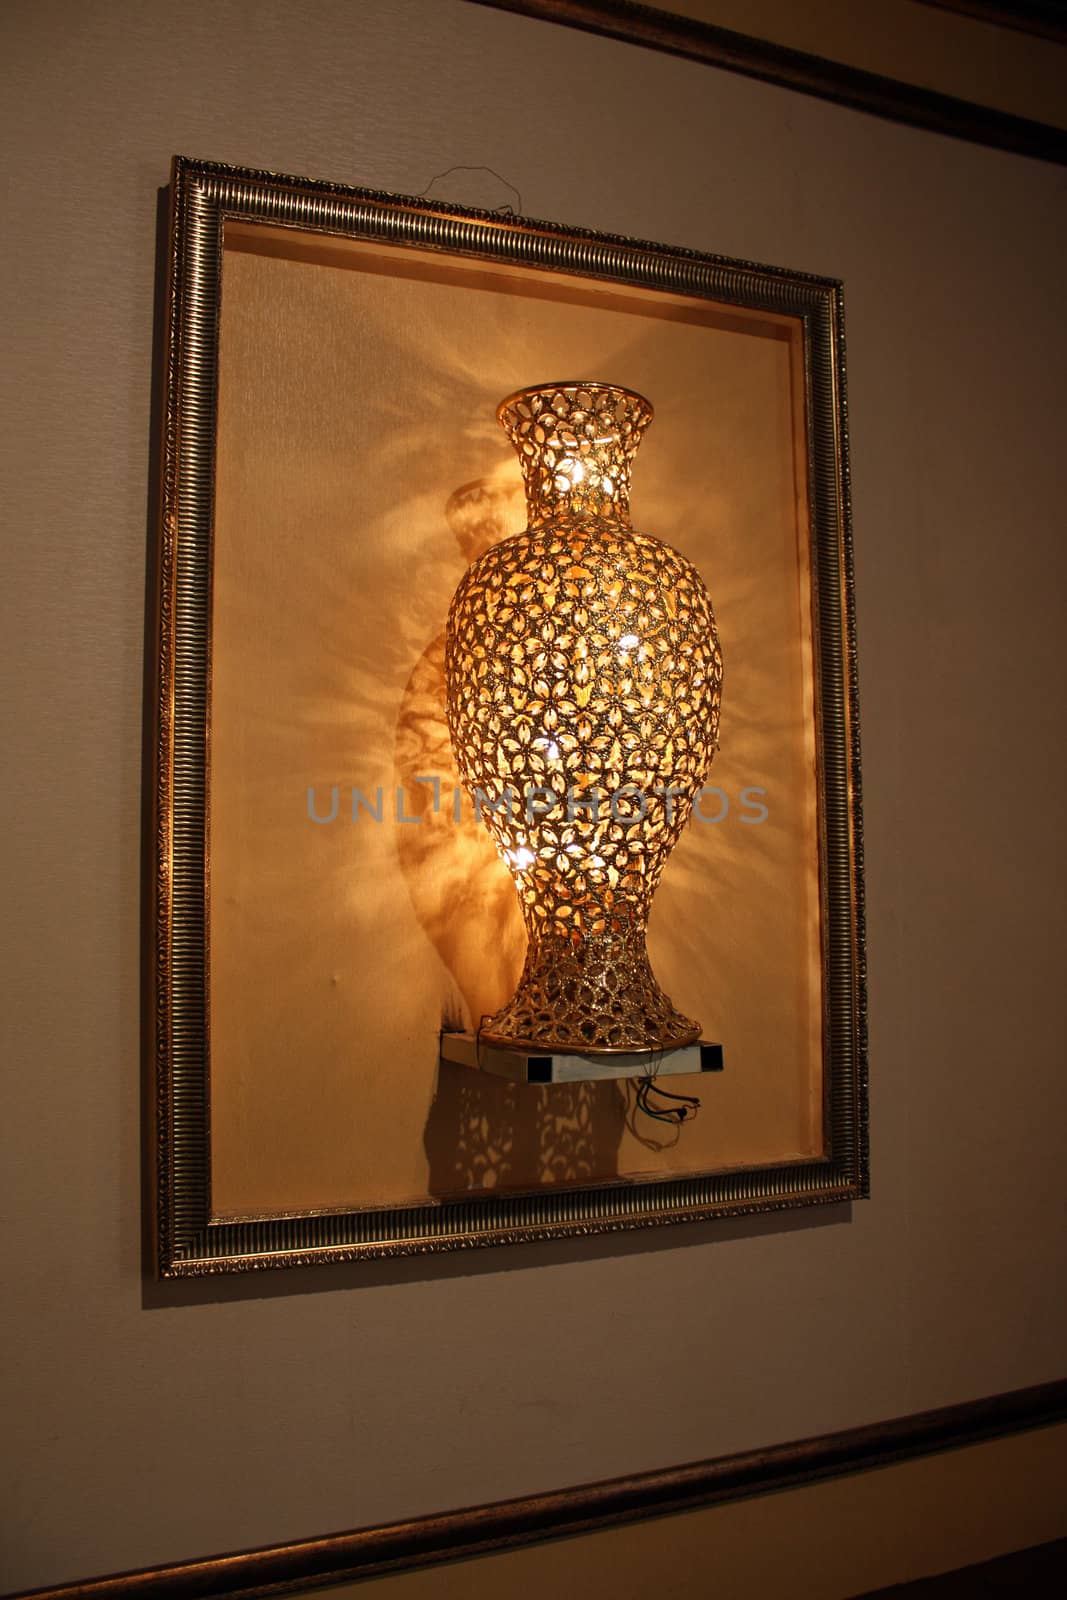 A beautiful lamp designed in the shape of a large flower vase.